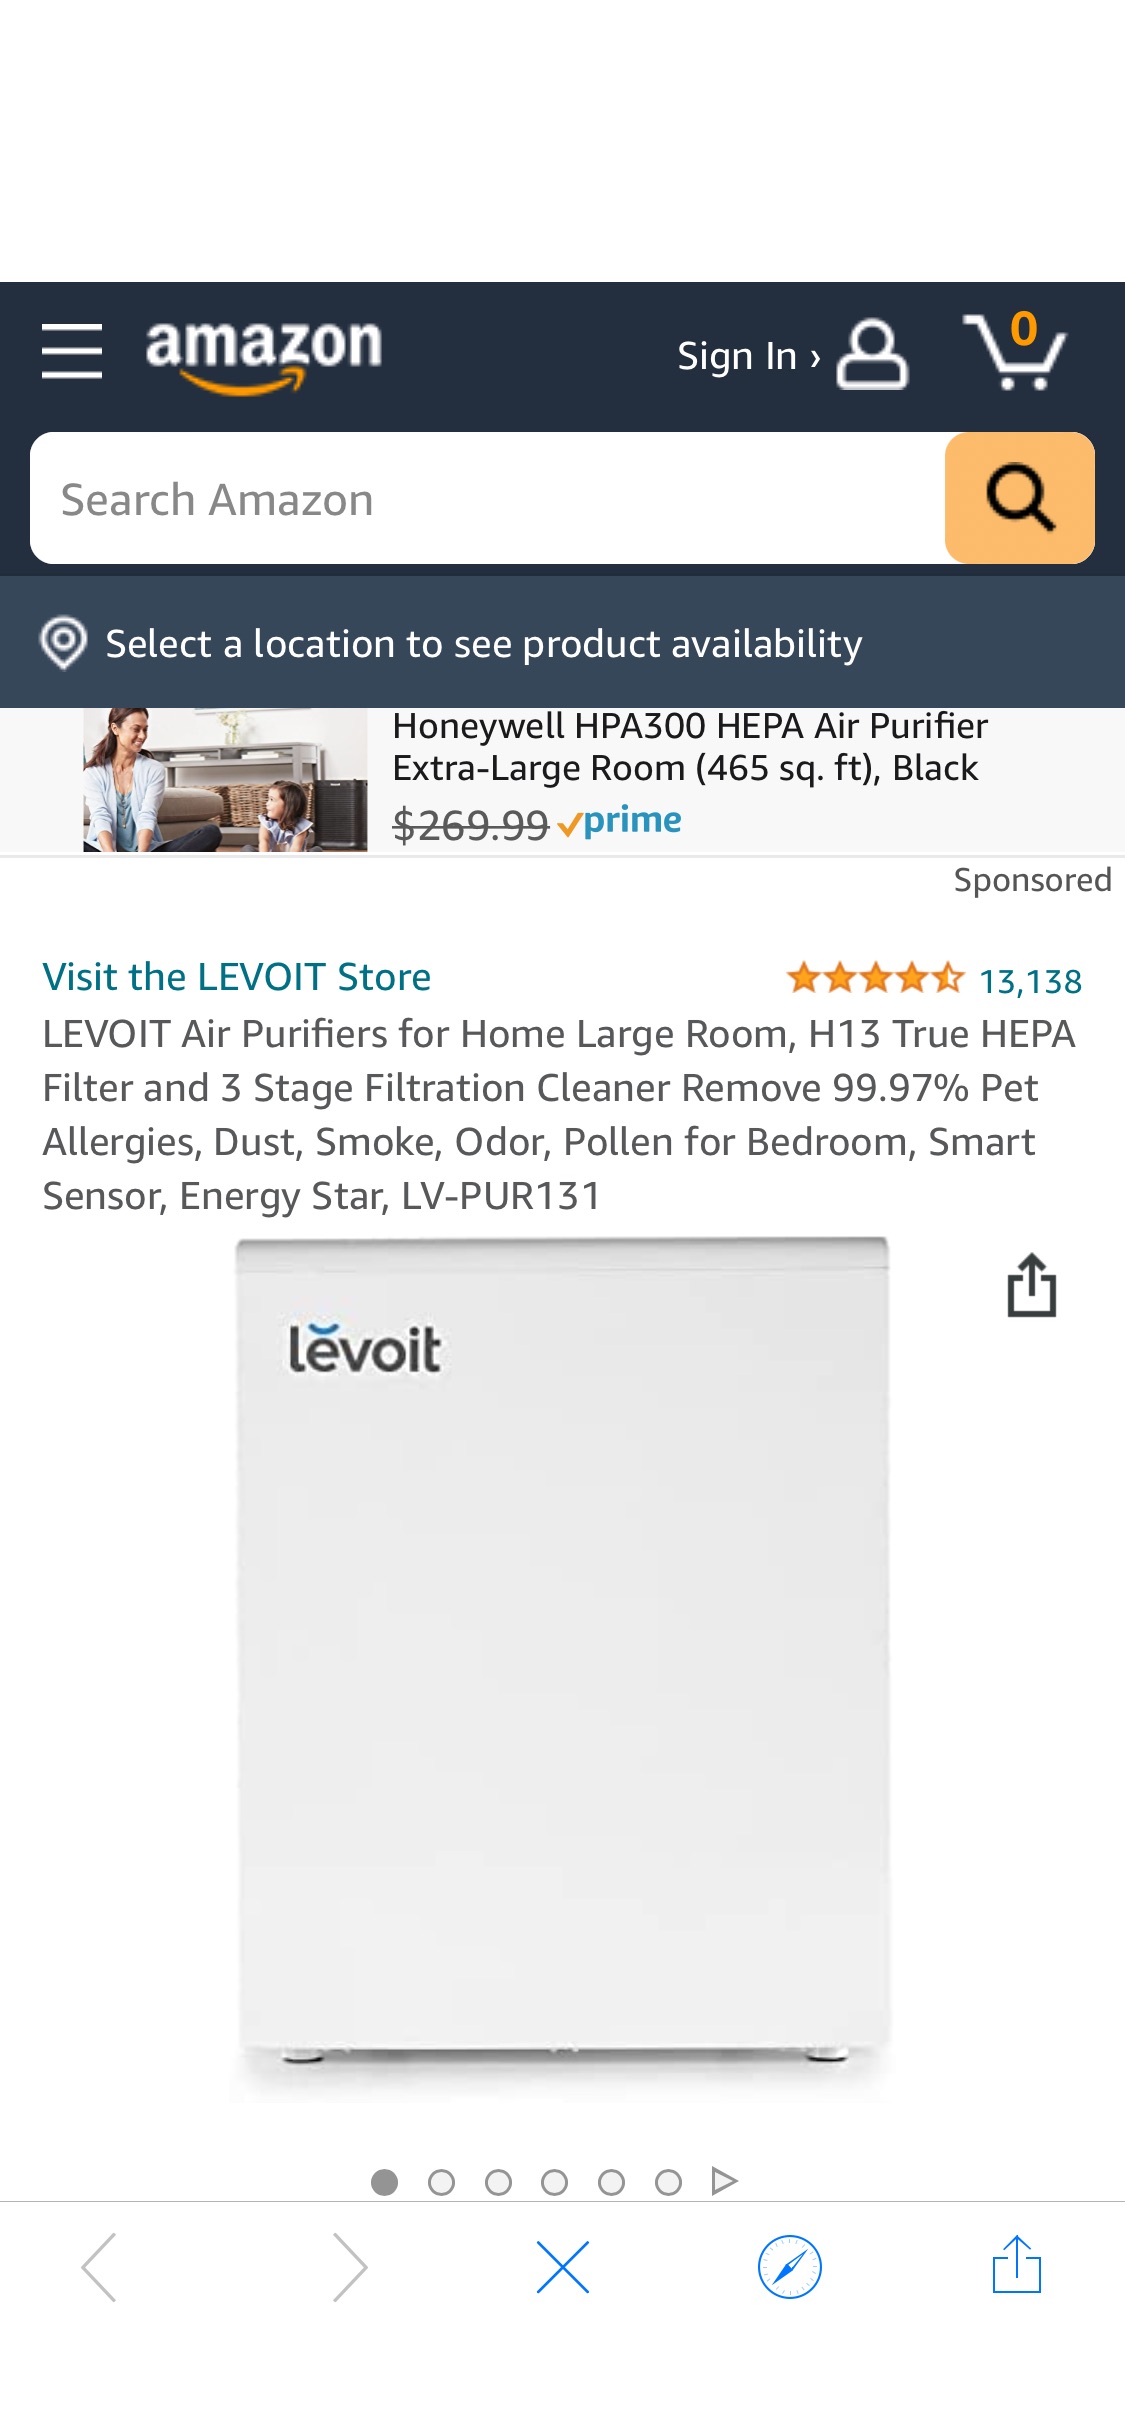 LEVOIT Air Purifiers for Home Large Room, H13 True HEPA Filter and 3 Stage Filtration Cleaner Remove 99.97% Pet Allergies, Dust, Smoke, Odor, Pollen for Bedroom, Smart Sensor, Energy Star, LV-PUR131